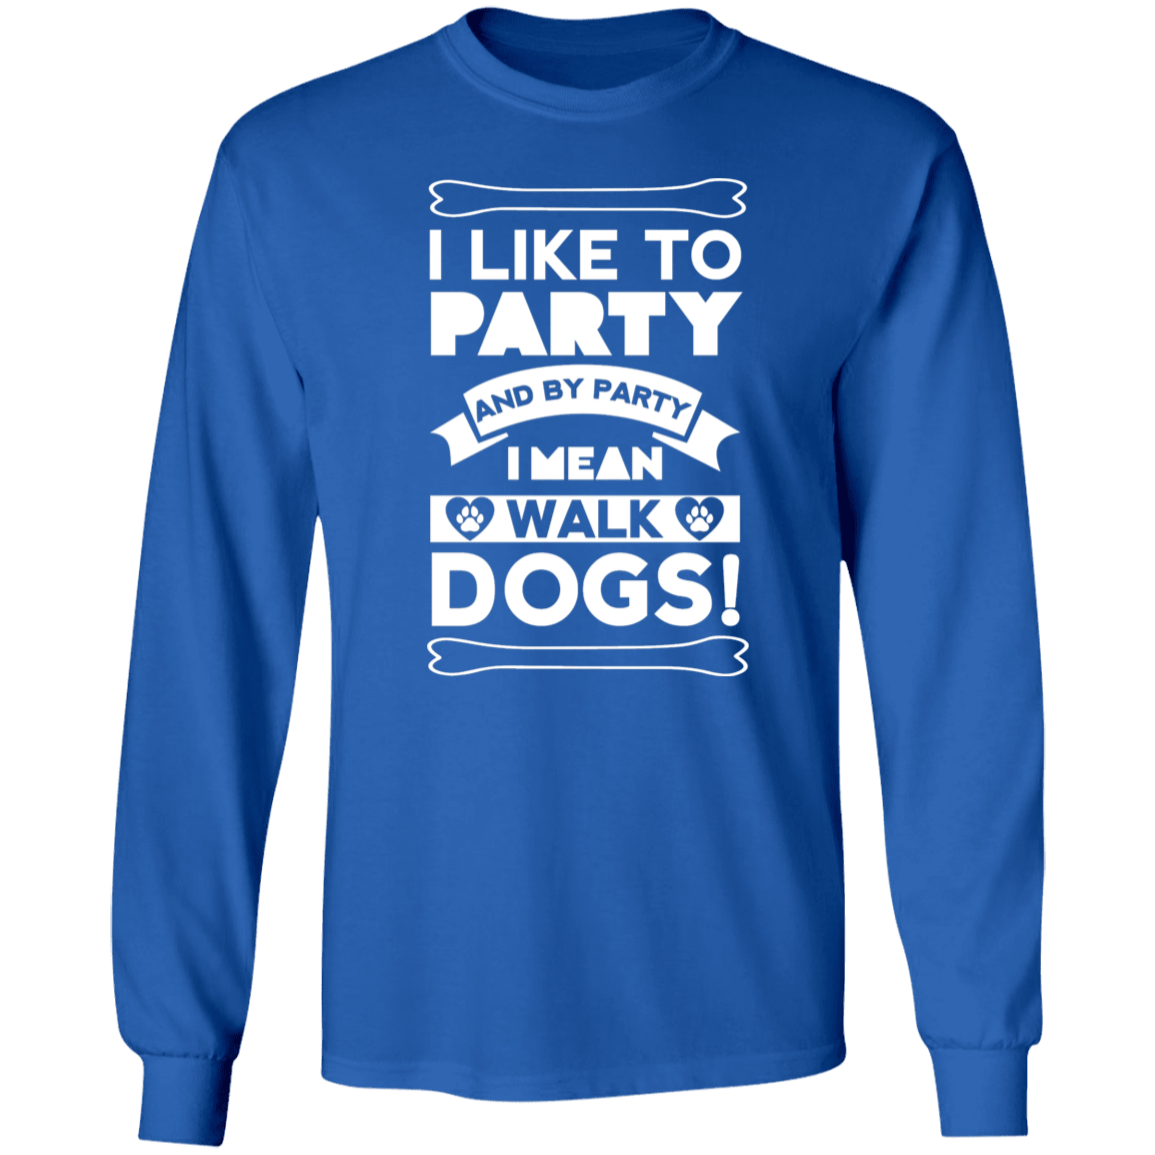 I Like To Party Dogs - Long Sleeve T Shirt.